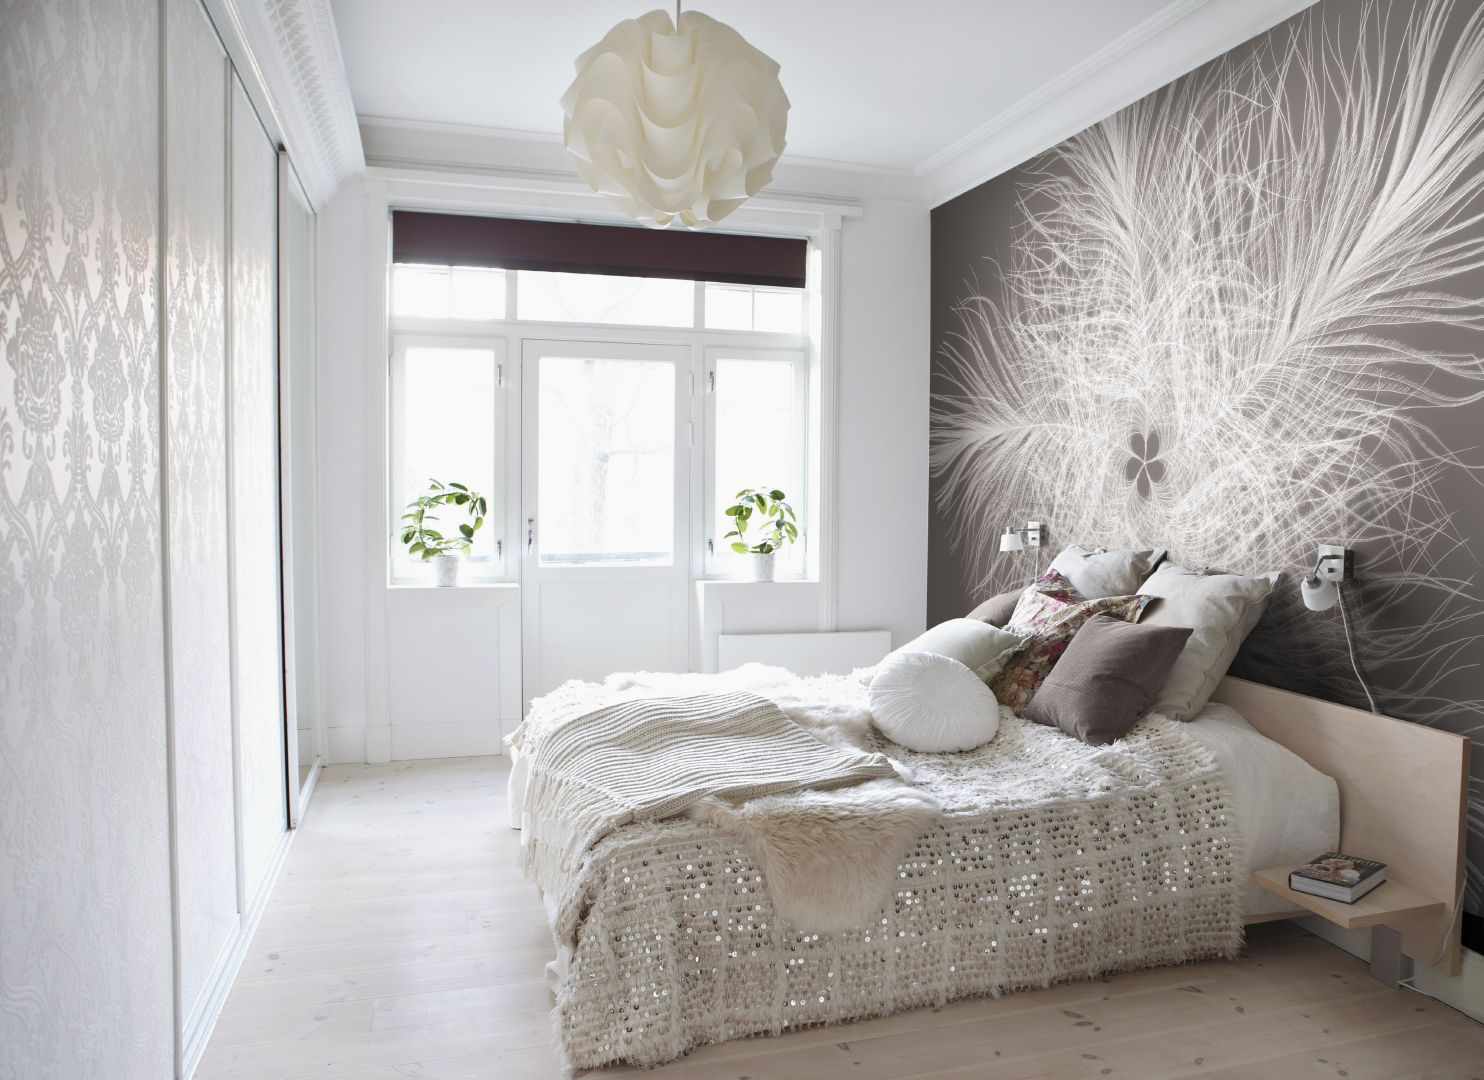 option of light decoration of the style of the walls in the bedroom